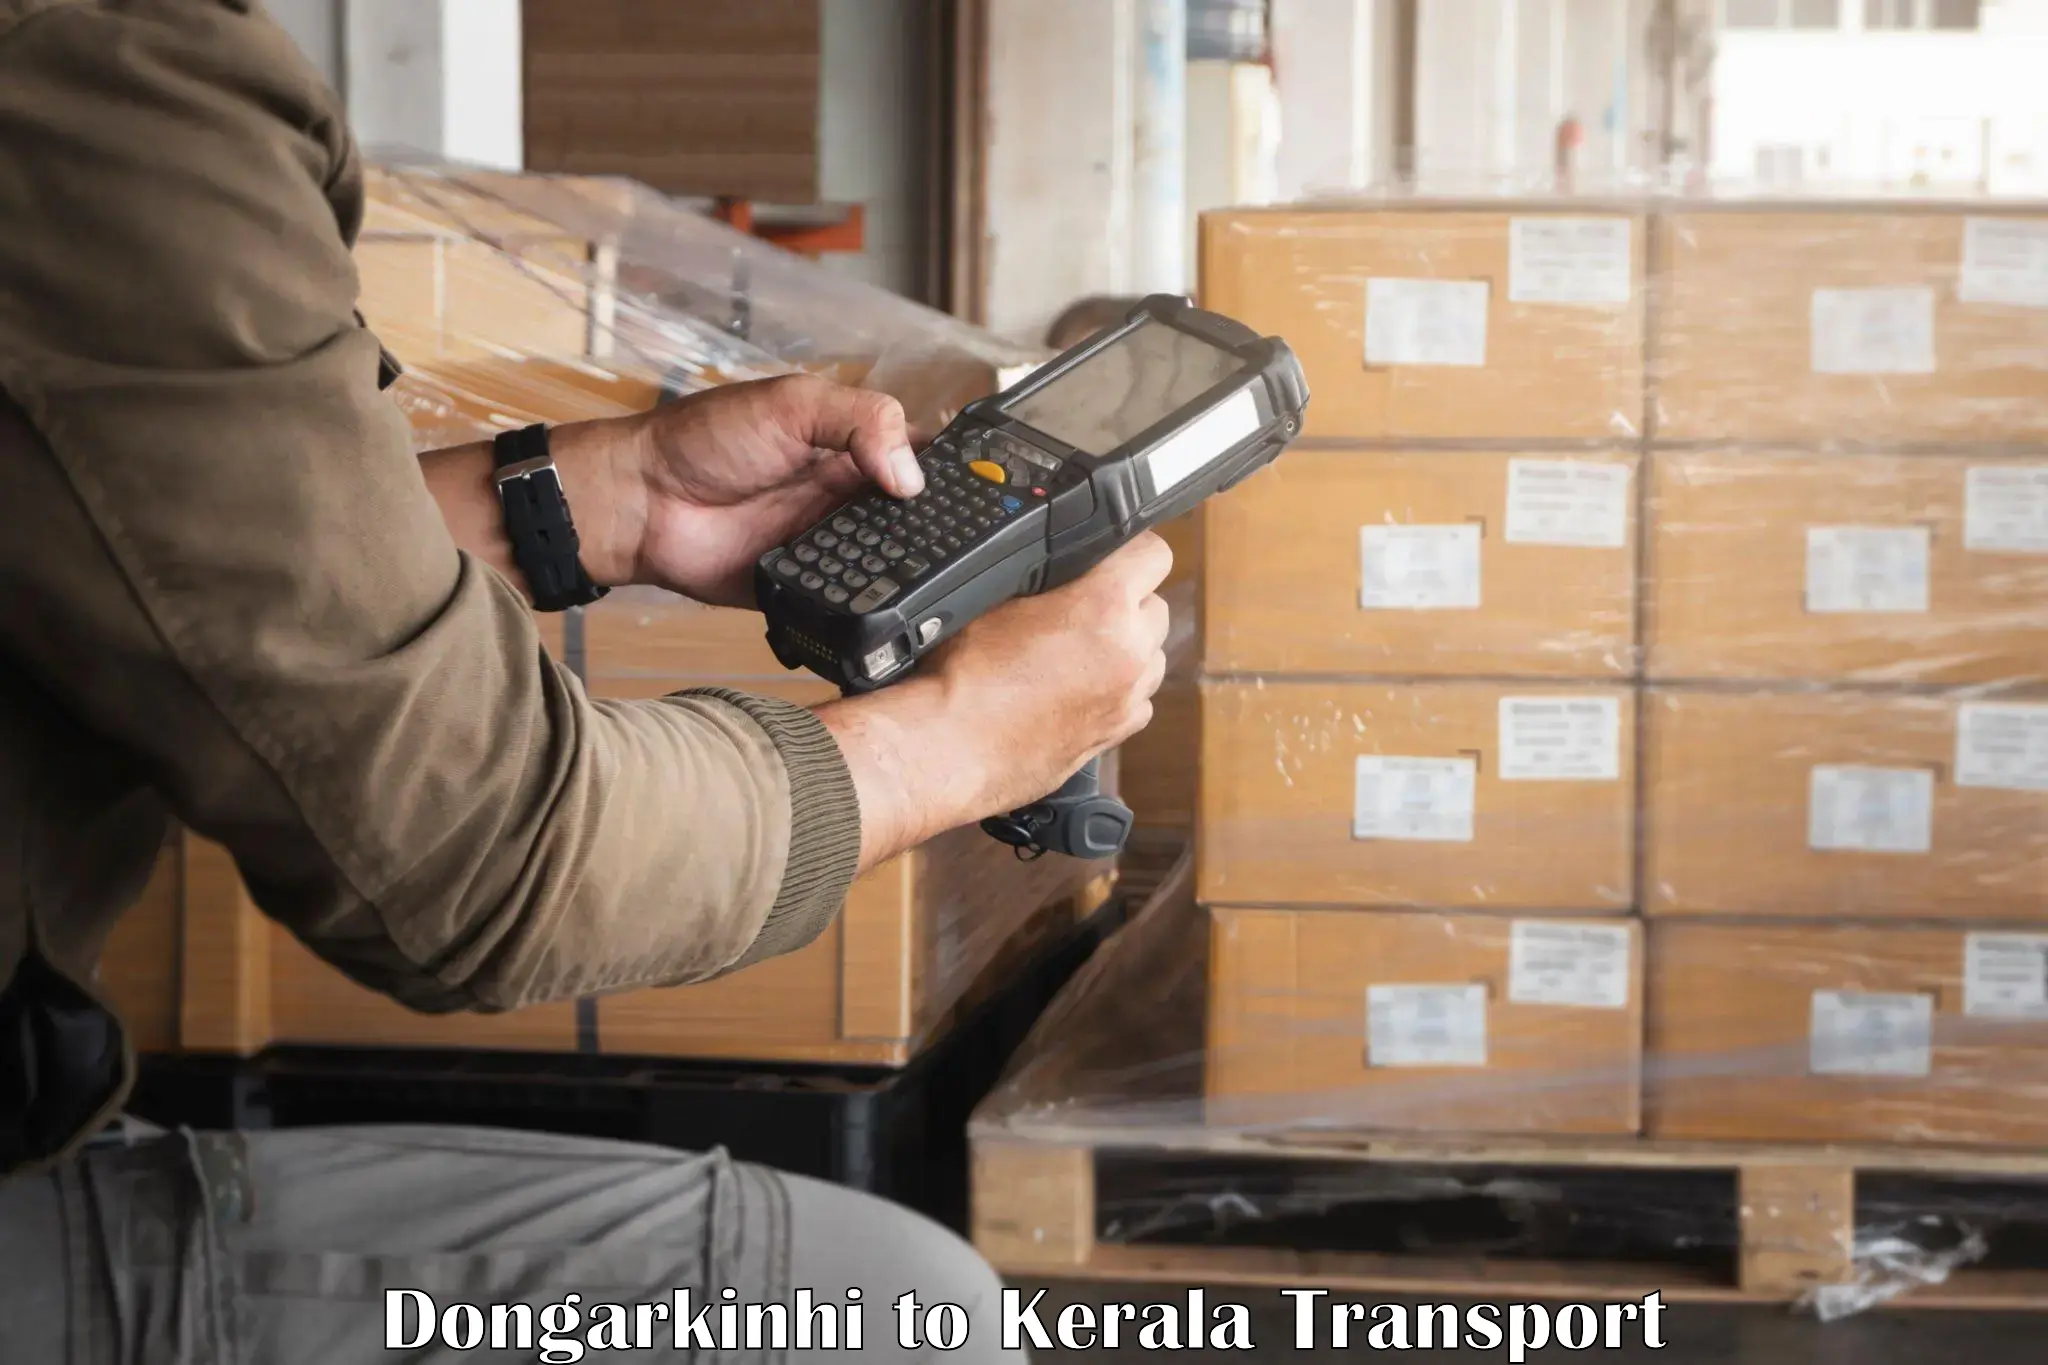 Parcel transport services Dongarkinhi to Kochi